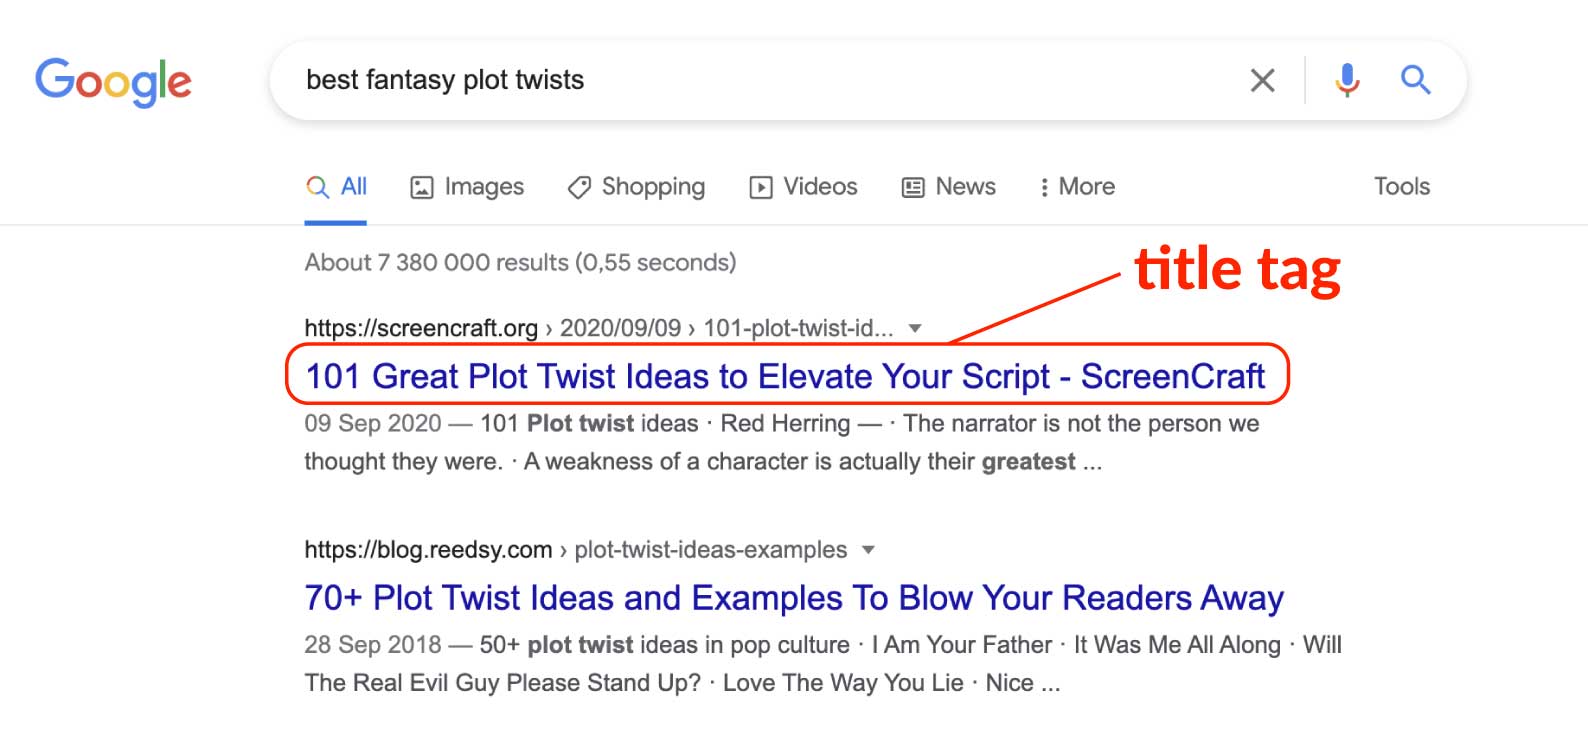 101 Great Plot Twist Ideas to Elevate Your Script - ScreenCraft